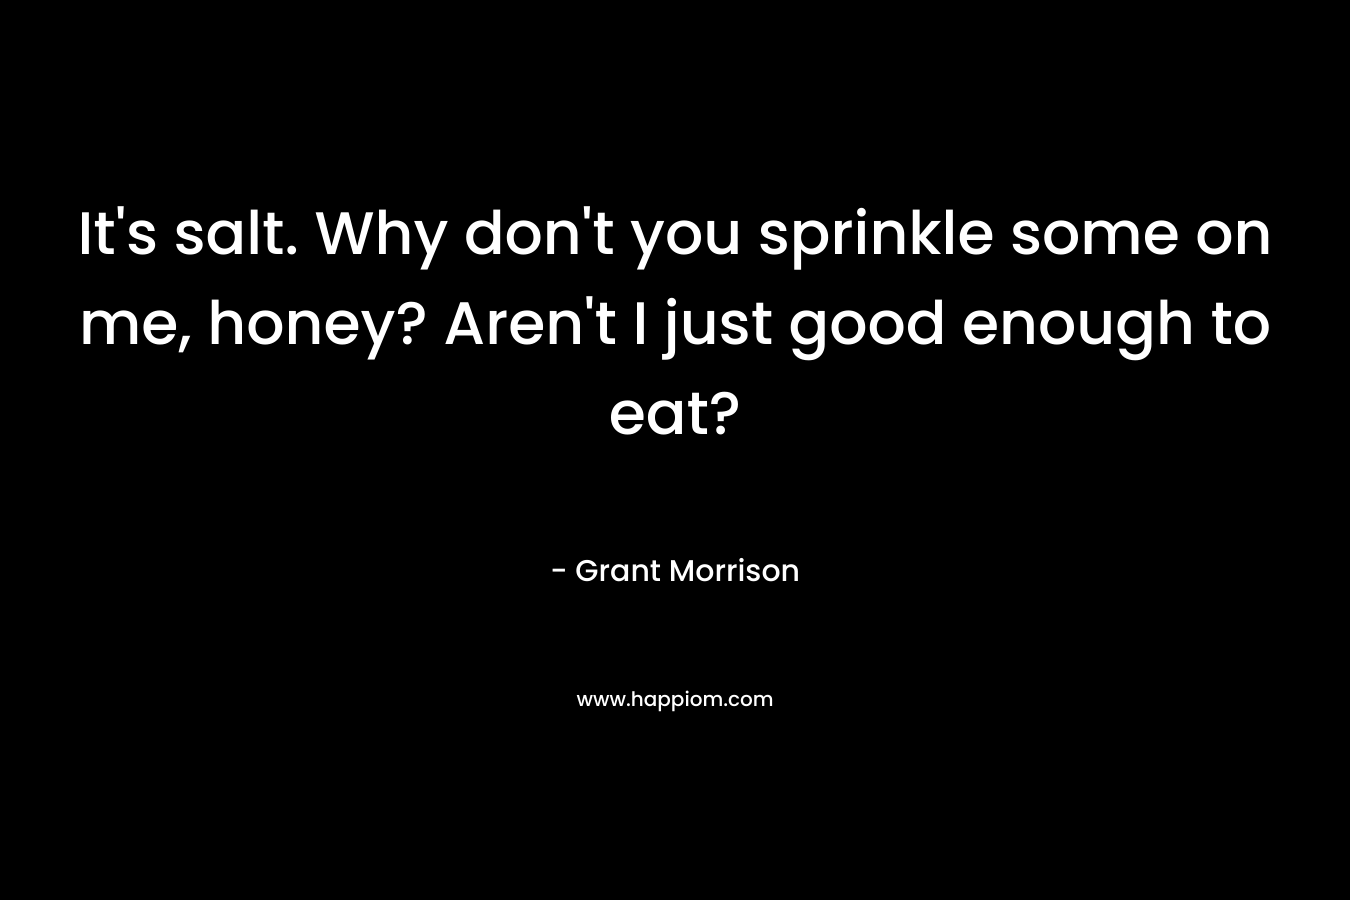 It’s salt. Why don’t you sprinkle some on me, honey? Aren’t I just good enough to eat? – Grant Morrison